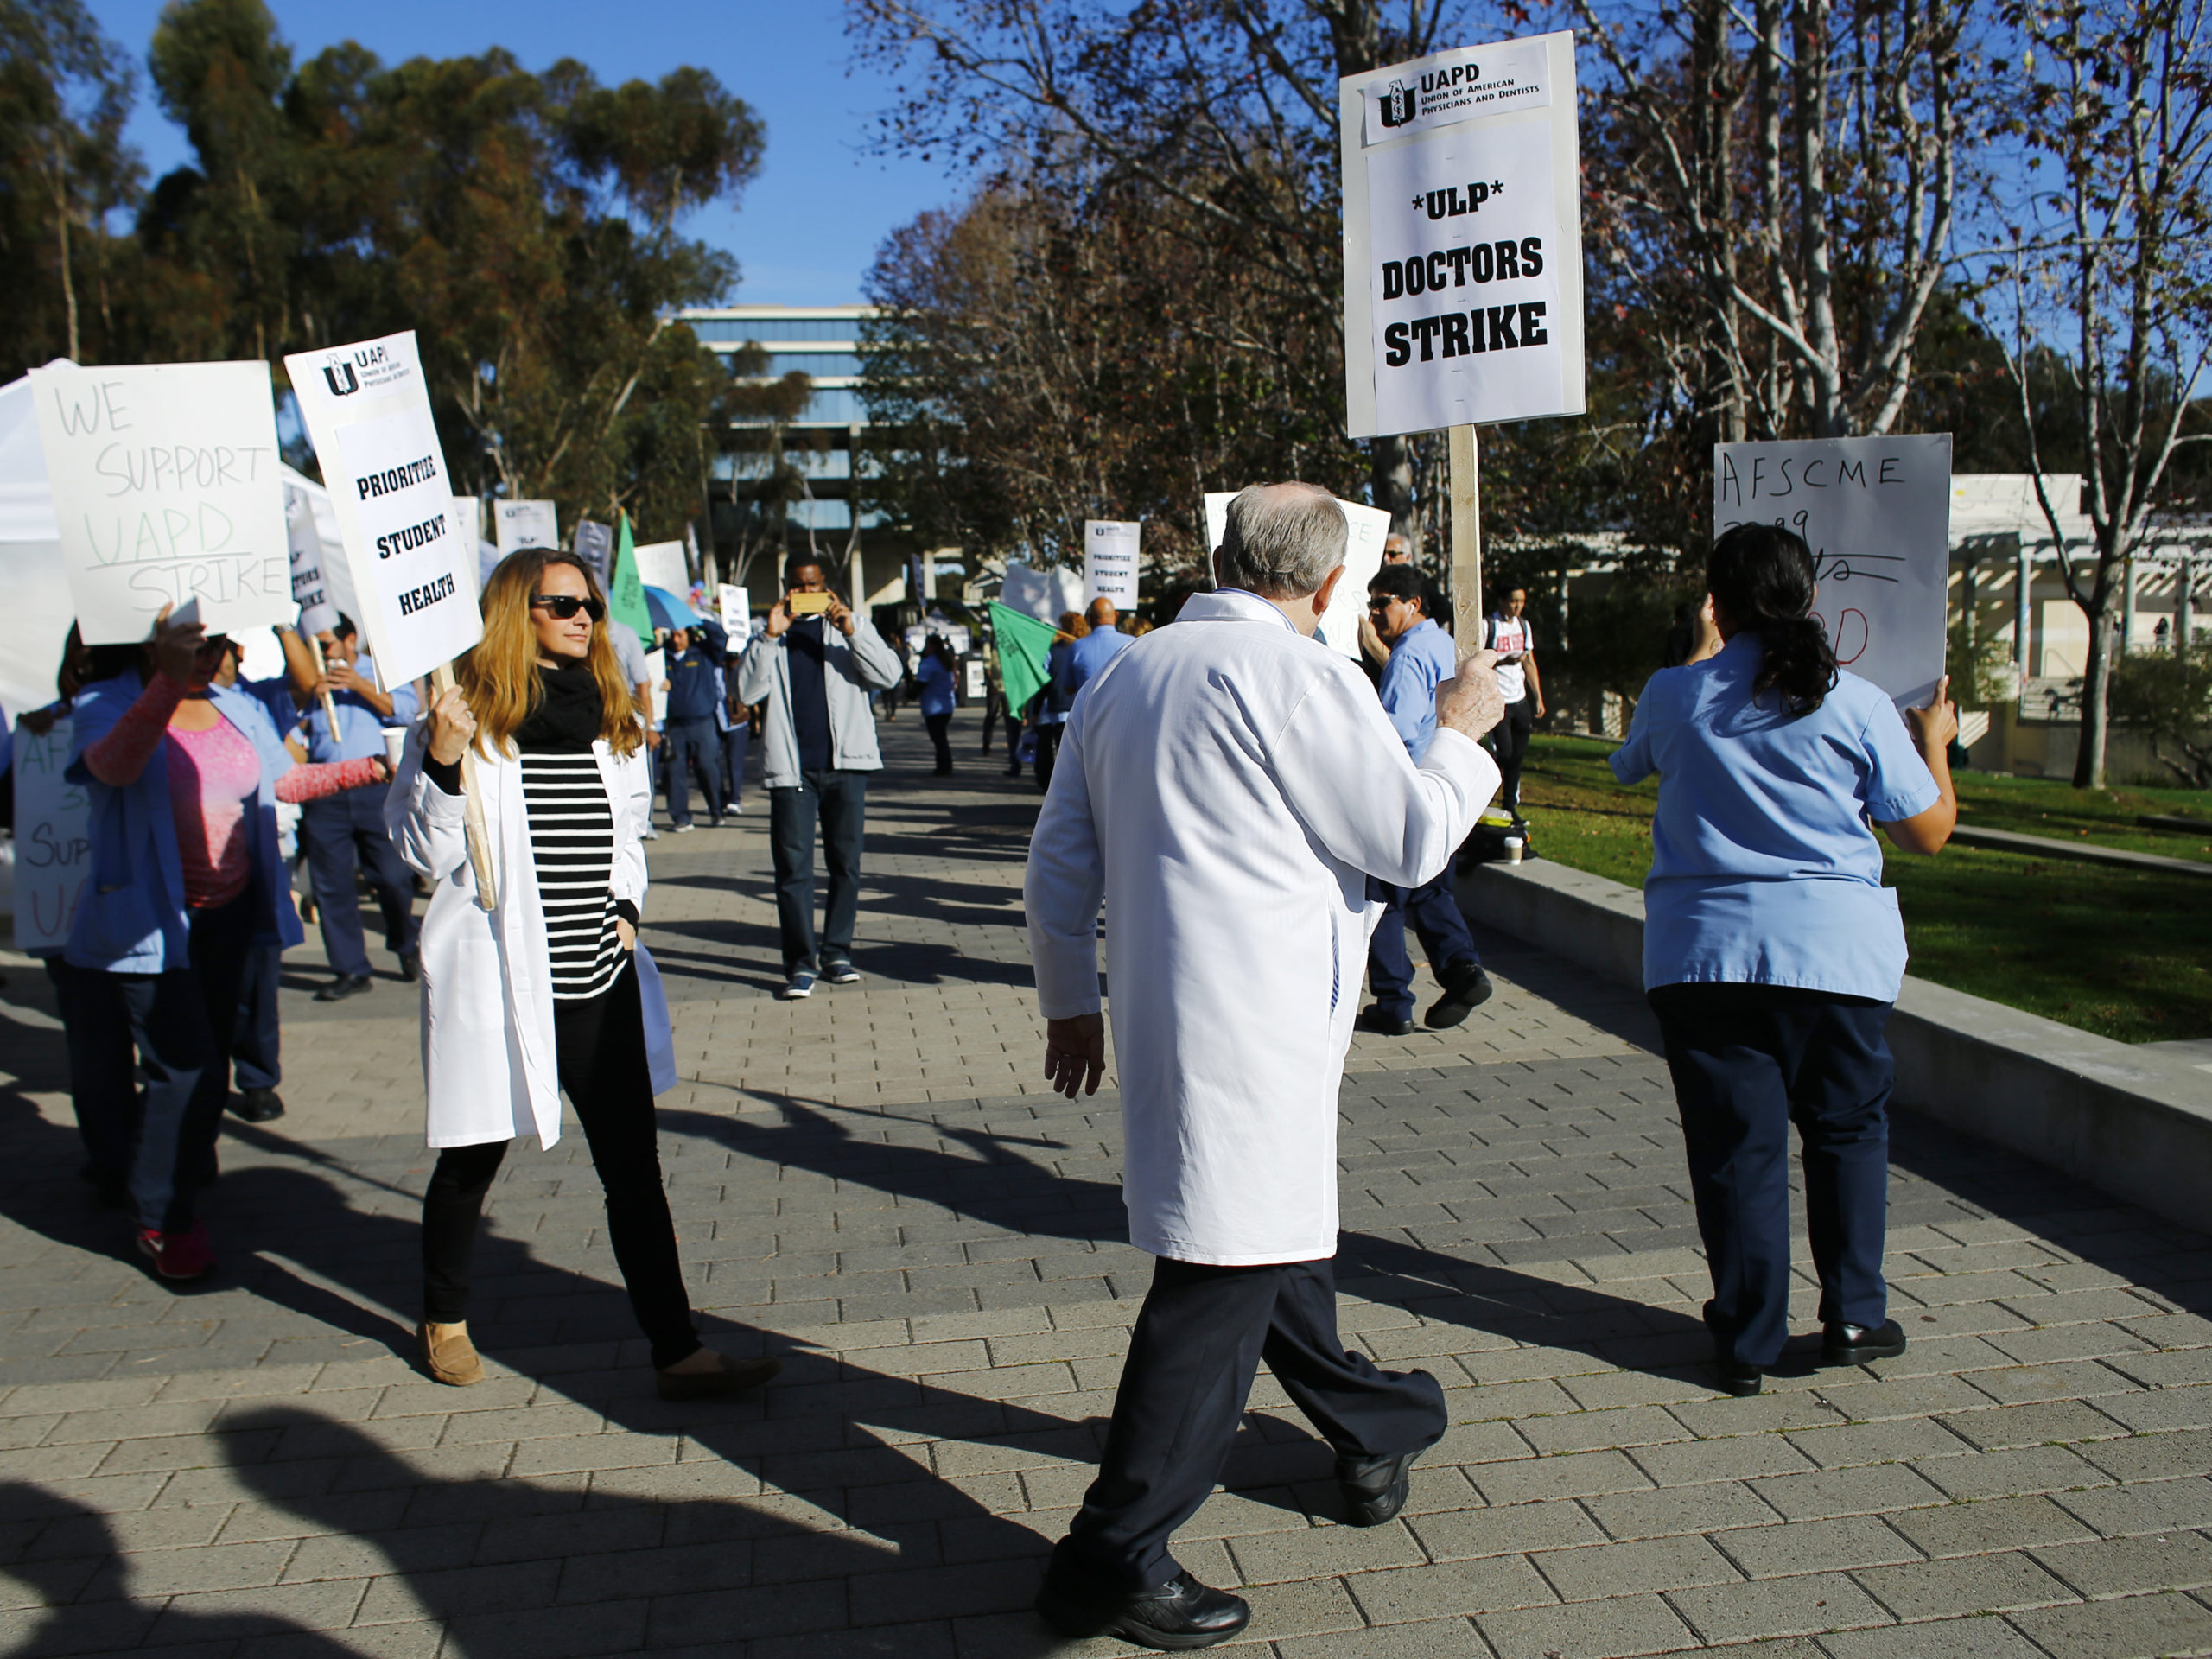 Medical Doctors and Physicians at the University of California San Diego hold a one-day unfair labor practices strike as they walk off the job in San Diego, California January 27, 2015.Organizers said the walkout will mark the first time in 25 years that fully licensed doctors have gone on strike against a U.S. employer. REUTERS/Mike Blake (UNITED STATES - Tags: BUSINESS EMPLOYMENT EDUCATION HEALTH CIVIL UNREST)